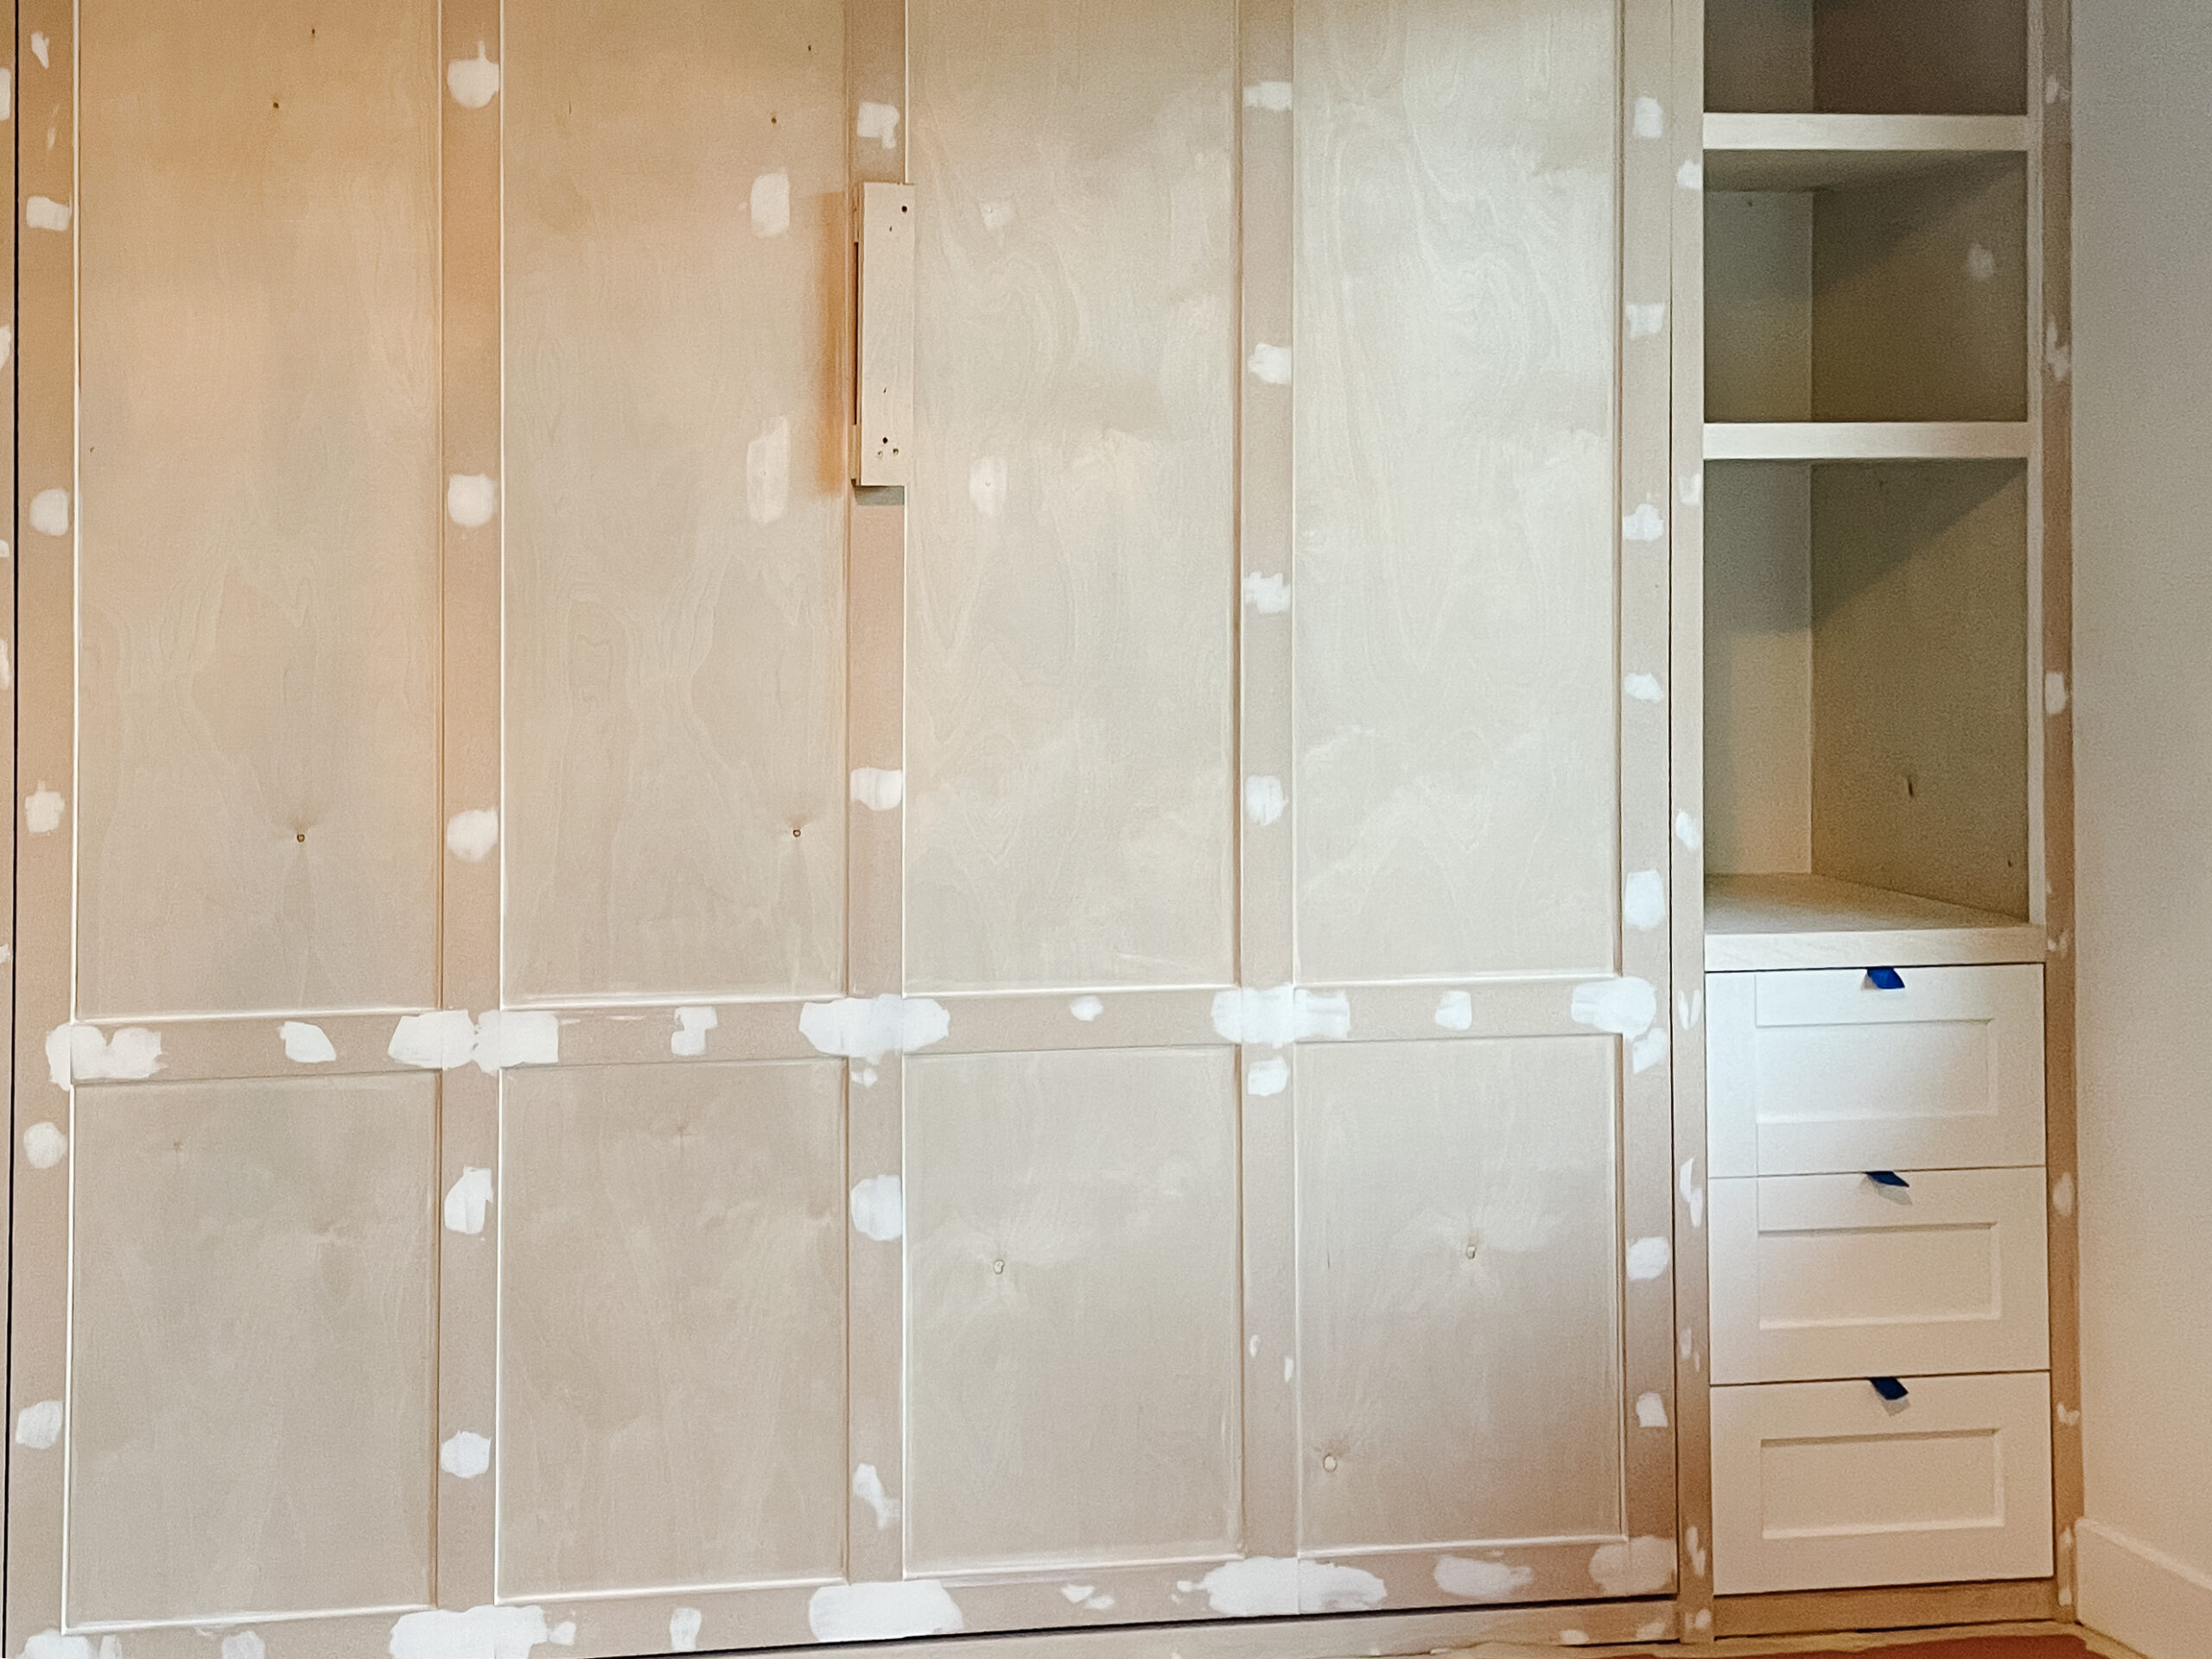 murphy bed built-in is complete with shelves, drawers, cabinets, complete with moulding. yet to be painted.